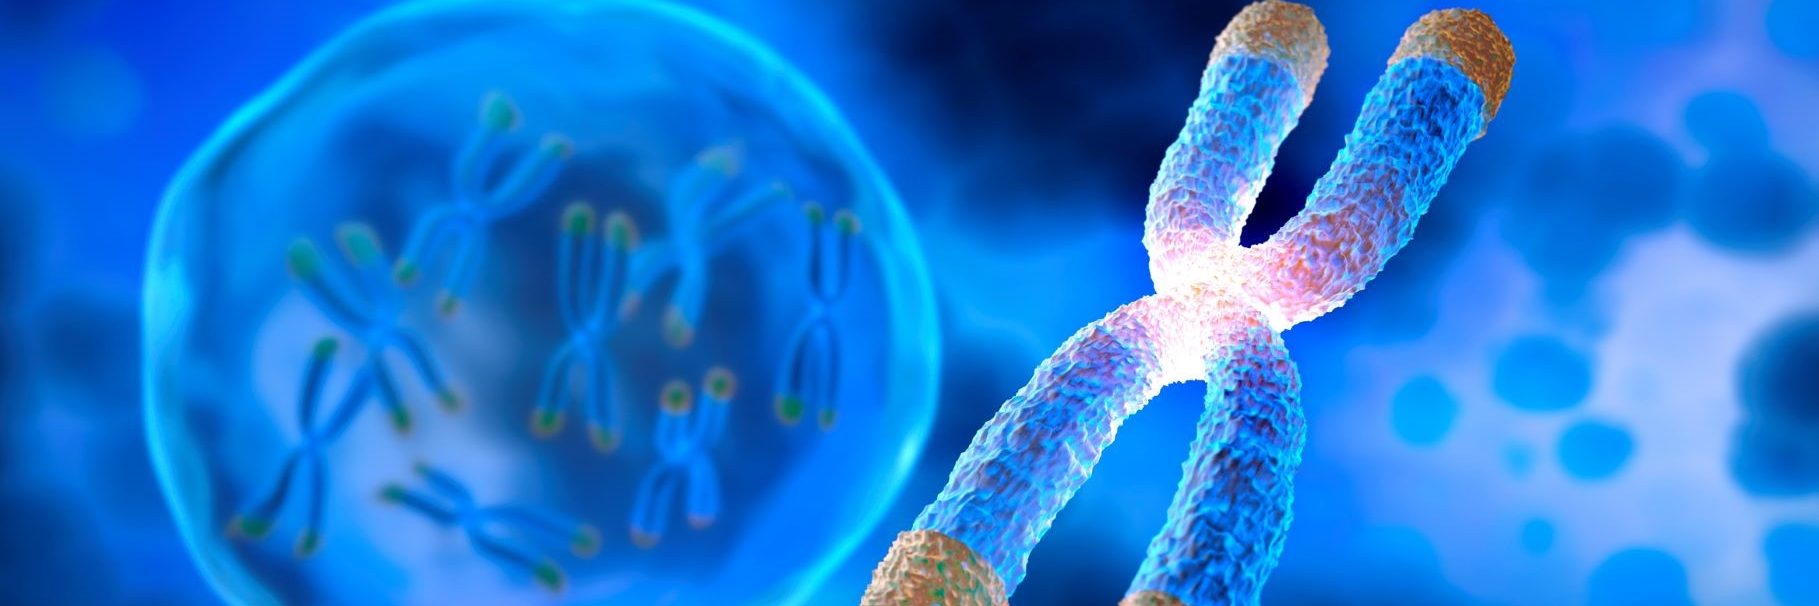 Accelerated Epigenetic Aging Seen in Women With HIV